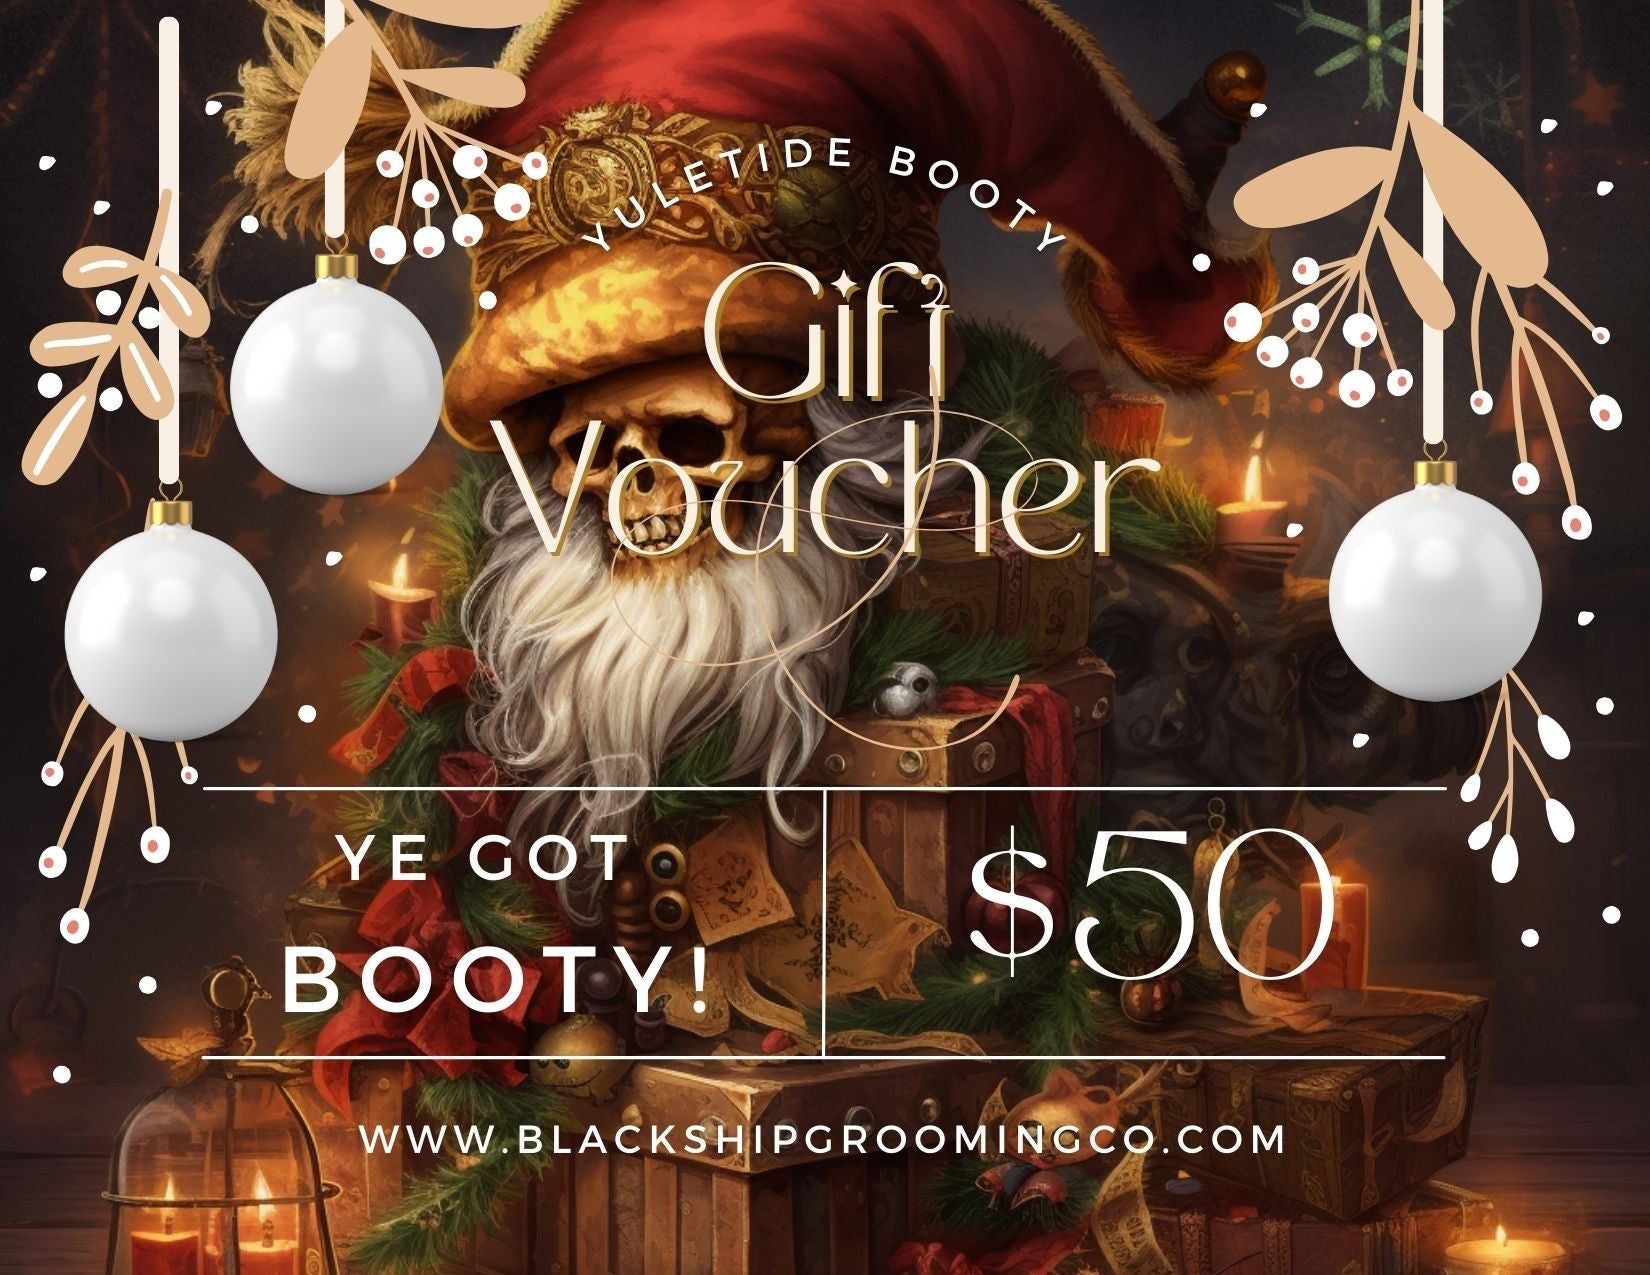 Yuletide Booty 50 Gift Card - Black Ship Grooming Co.